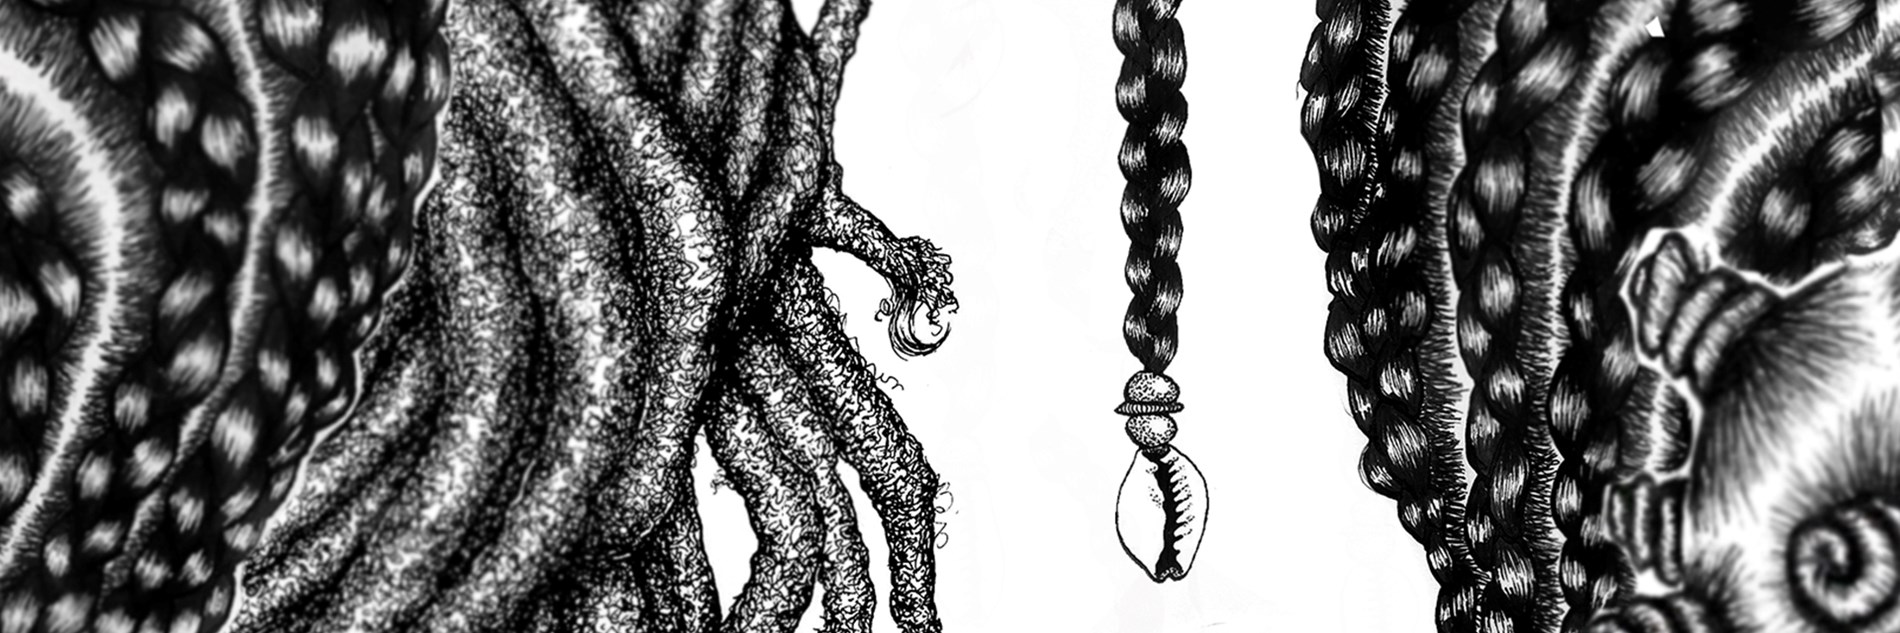 Black and white illustrations of close-ups of different Afro hair styles. In the middle of the image, a braid is hanging down with beads and a shell on the end and the artist's name Habiba Nabisubi is written below.